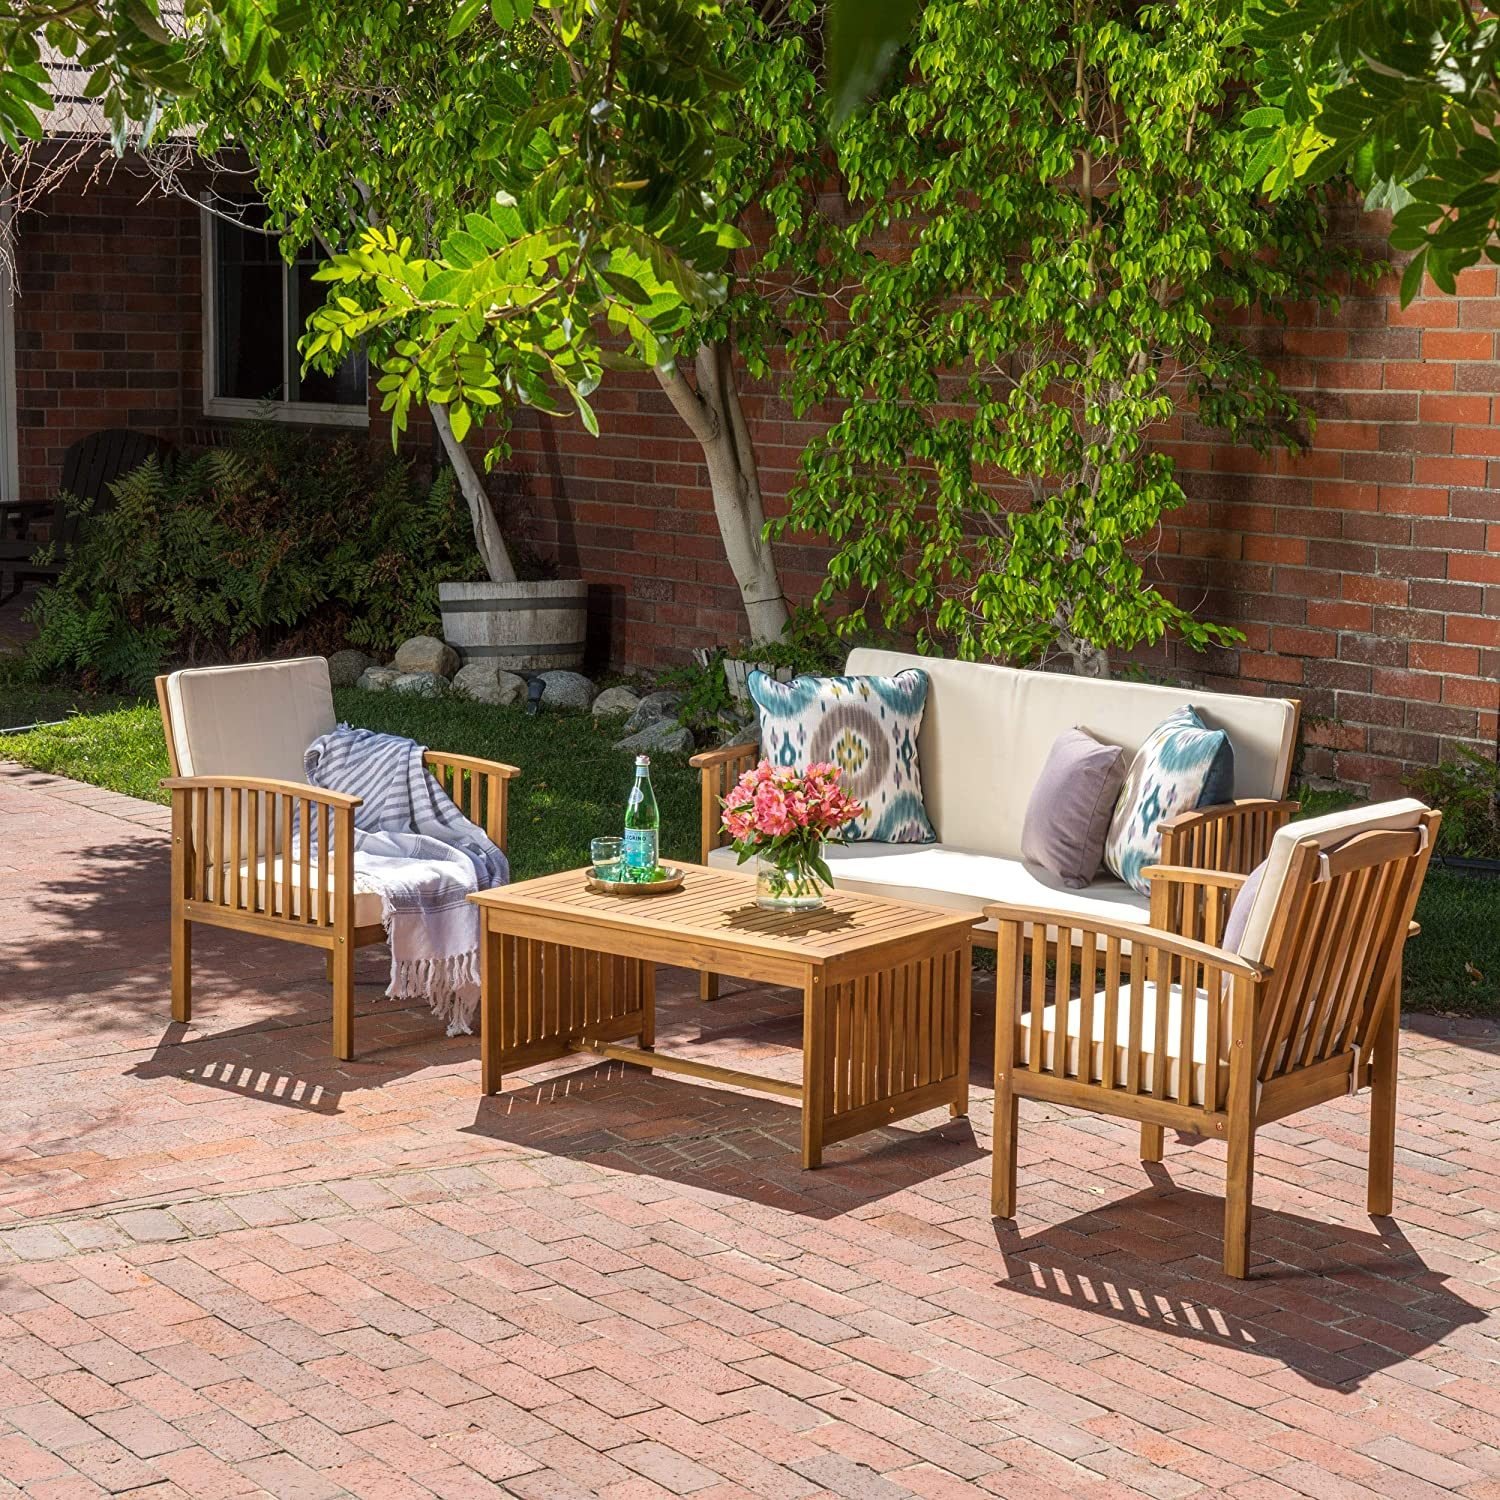 10 Deck Furniture Ideas for 2022